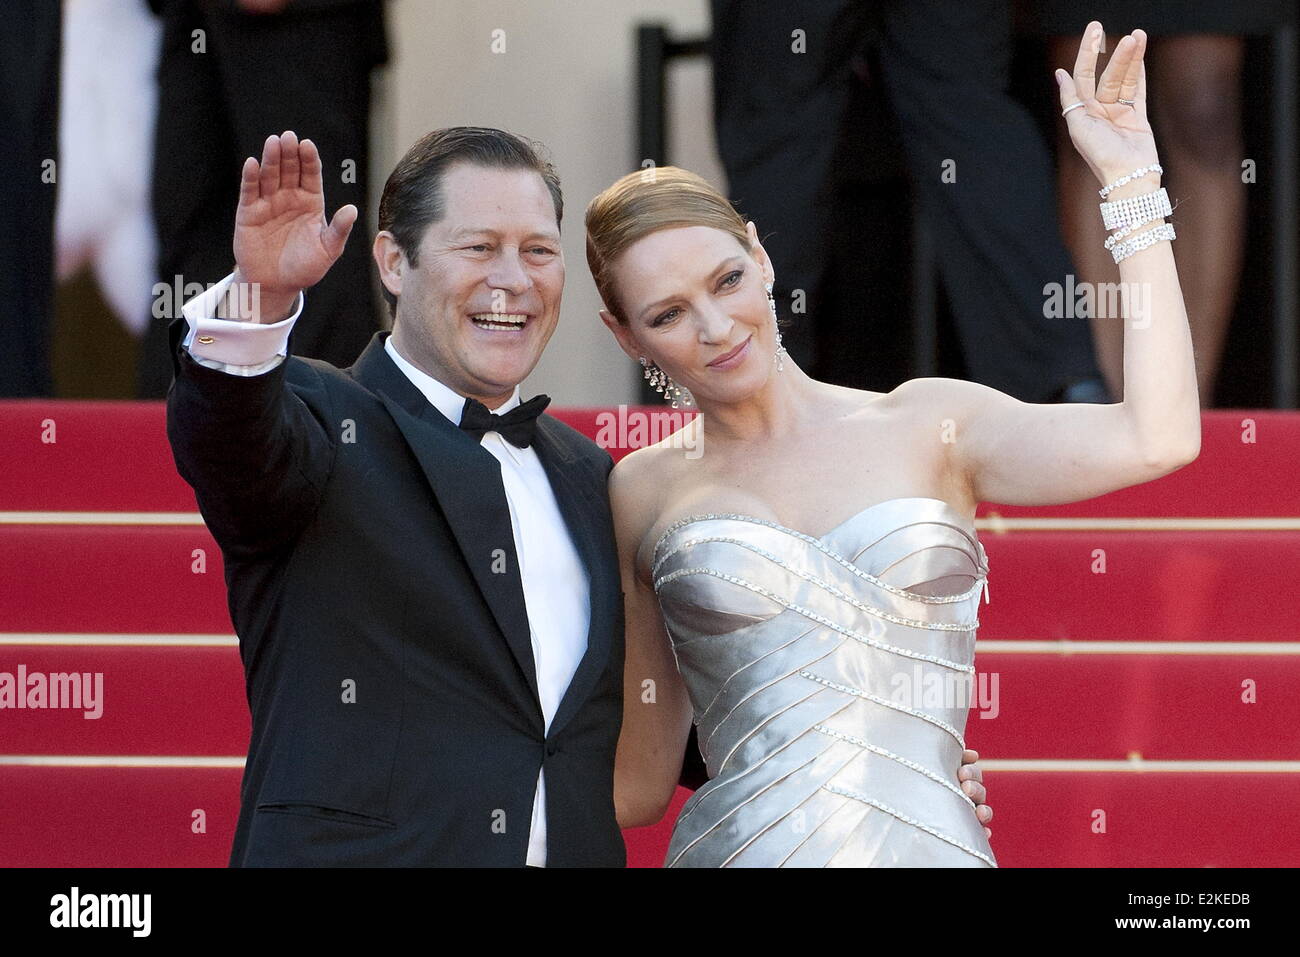 Uma Thurman and Arpad Busson at the 66th Cannes Film Festival 'Zulu' Premiere.  Where: Cannes, France When: 26 May 2013 Stock Photo